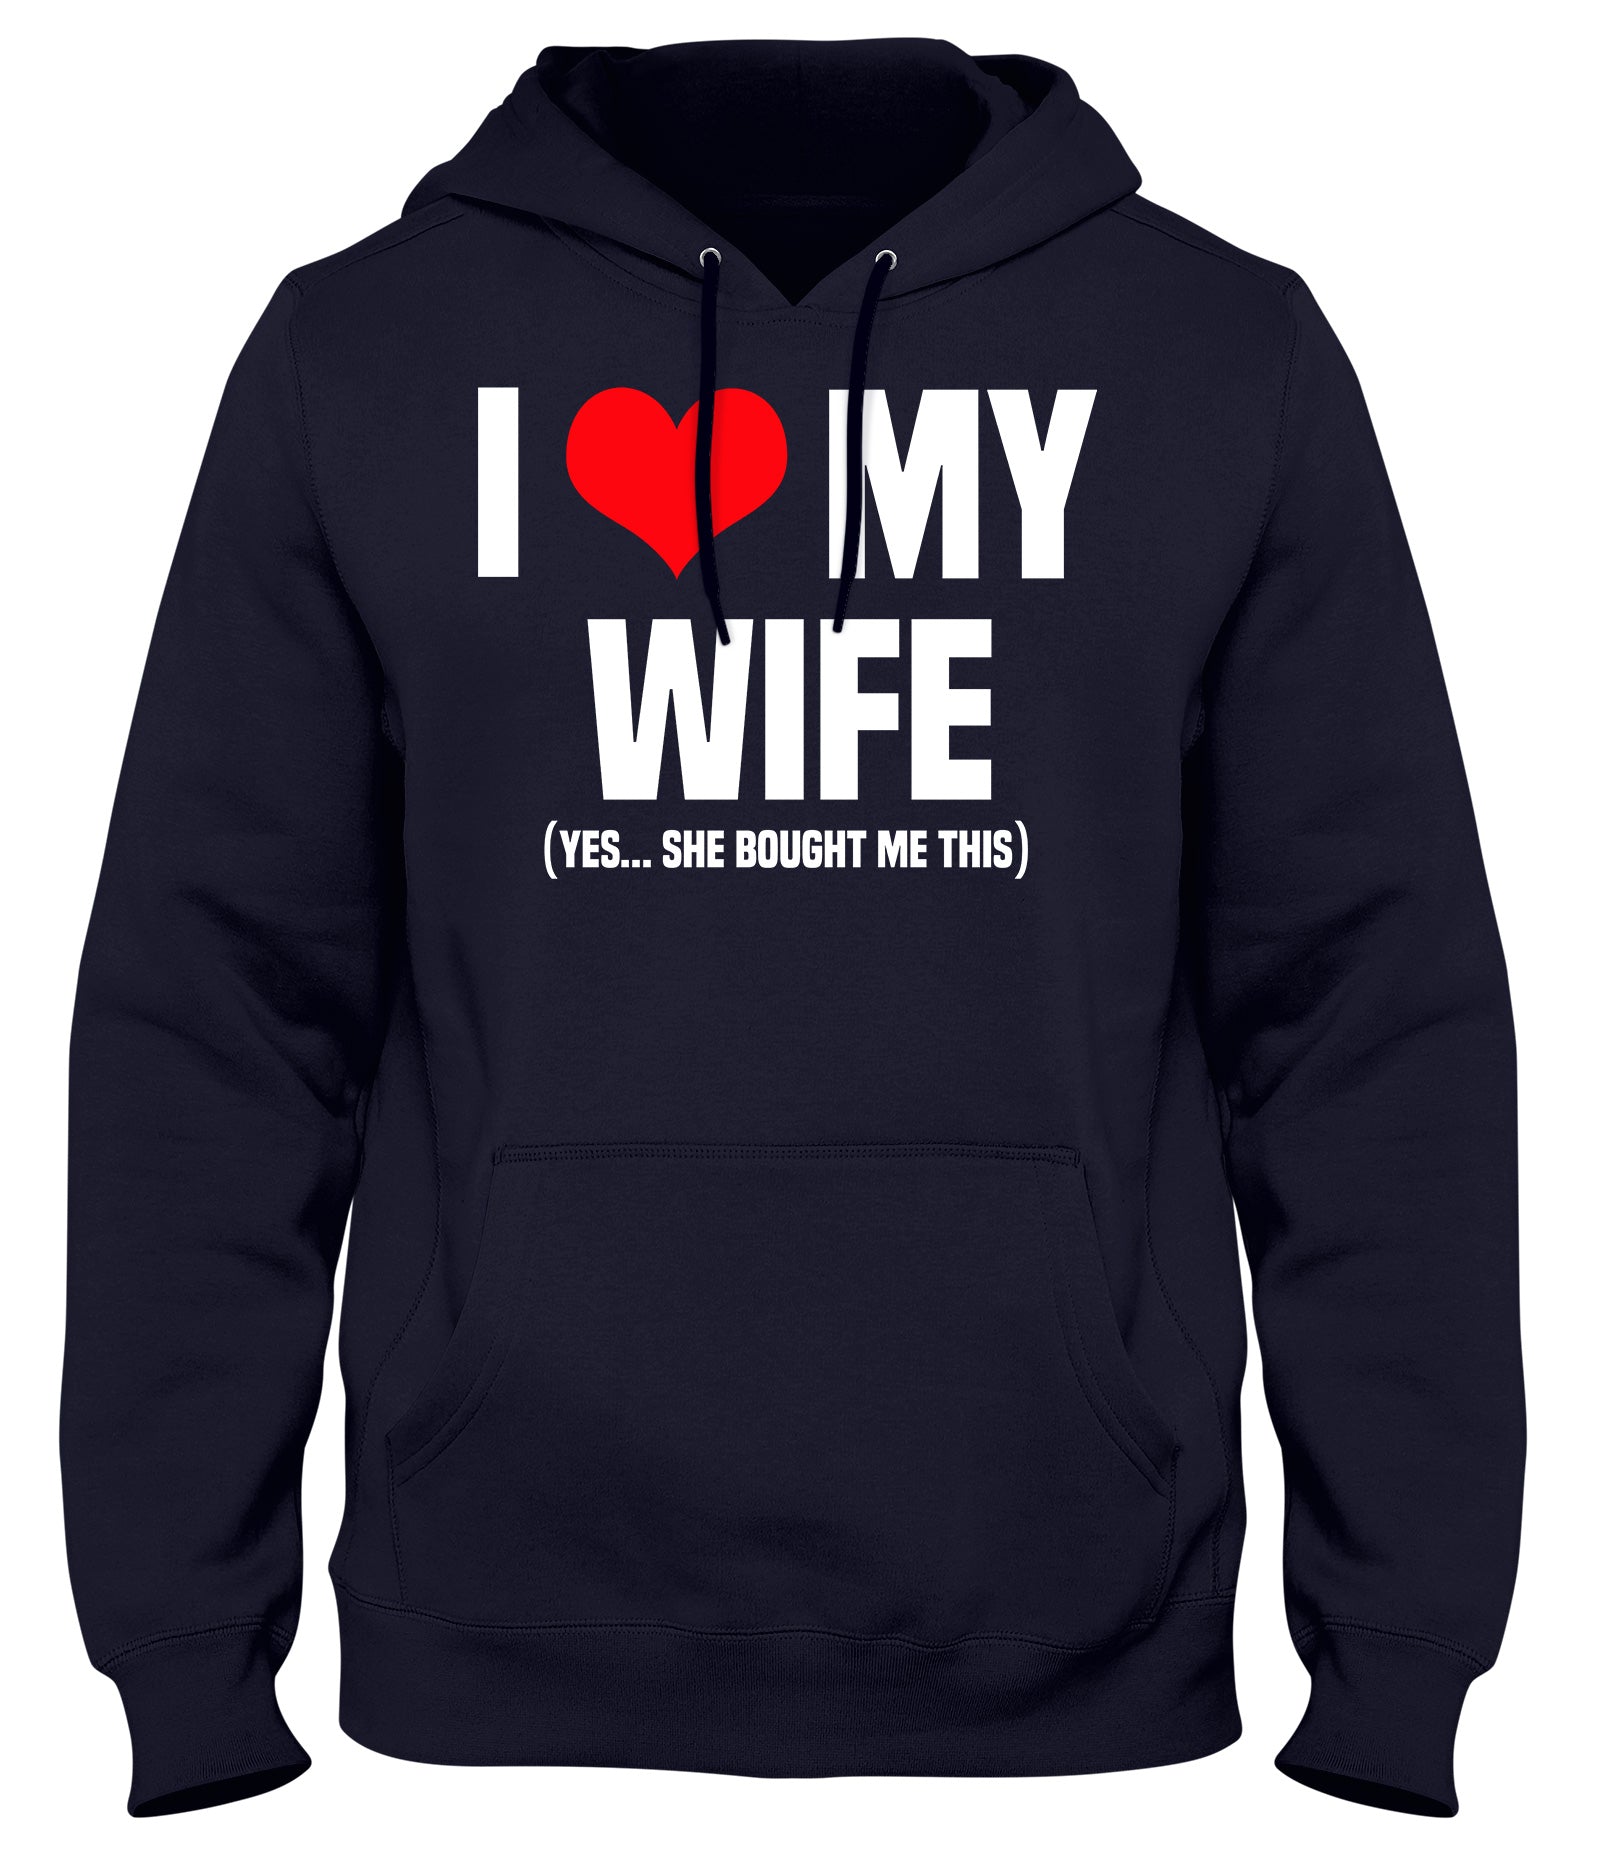 I LOVE MY WIFE (YES SHE BOUGHT ME THIS)  MENS WOMENS LADIES UNISEX FUNNY SLOGAN HOODIE